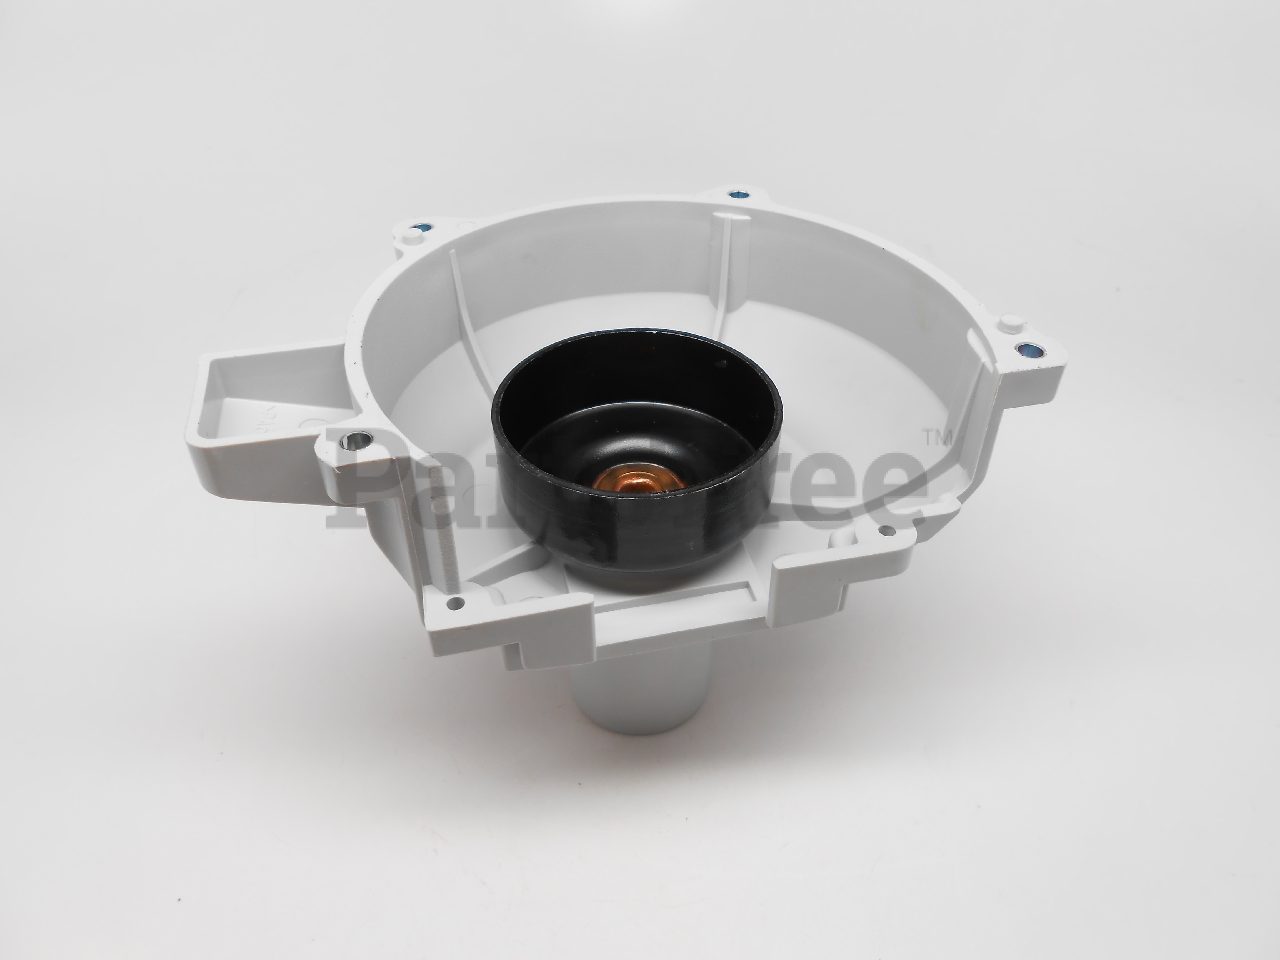 FAN COVER ASSEMBLY ECHO 10150356630 MODELS LISTED